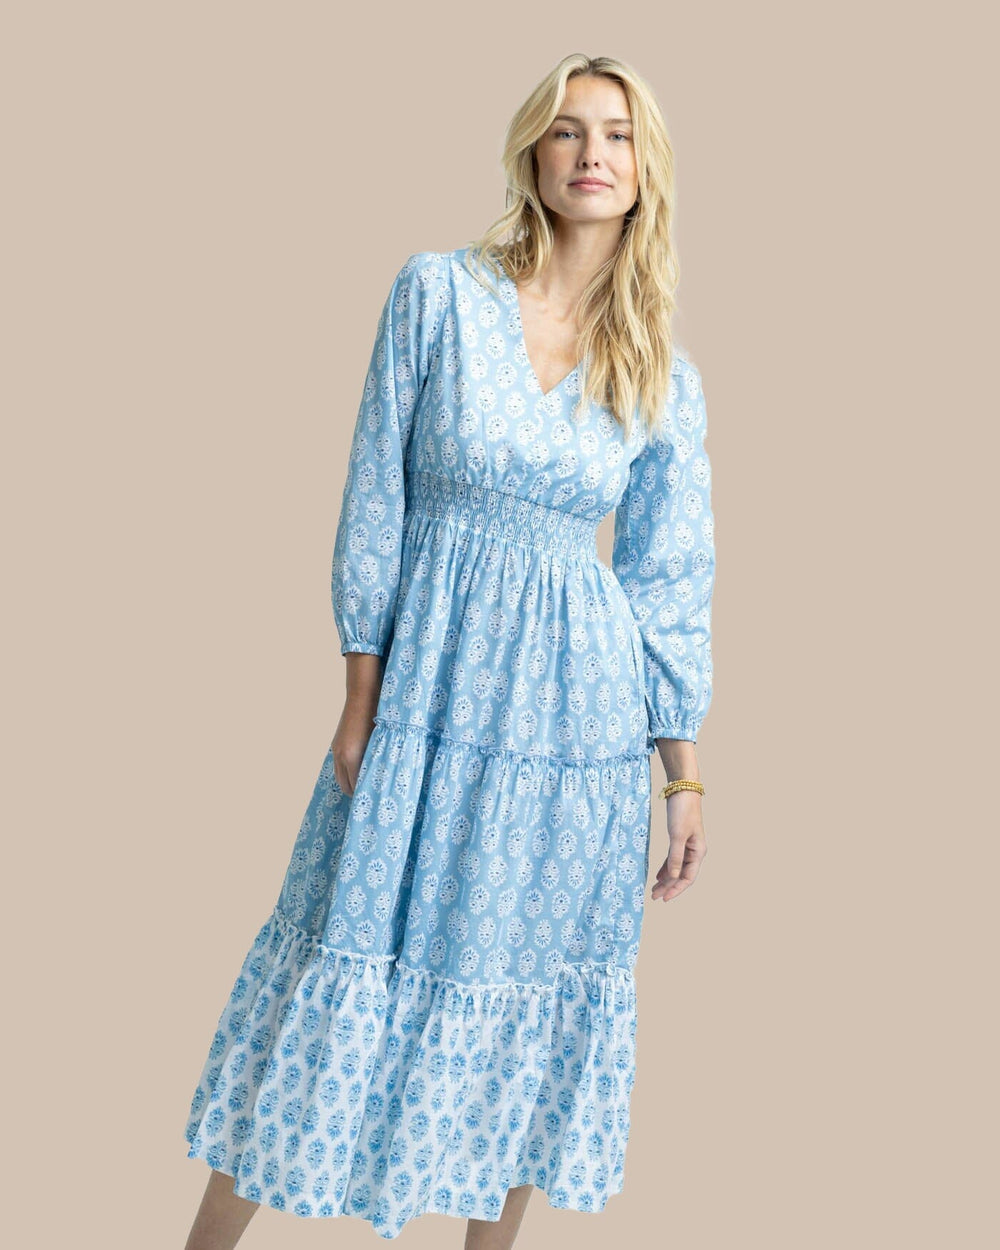 The front view of the Southern Tide Blaire Garden Variety Printed Maxi Dress by Southern Tide - Clearwater Blue